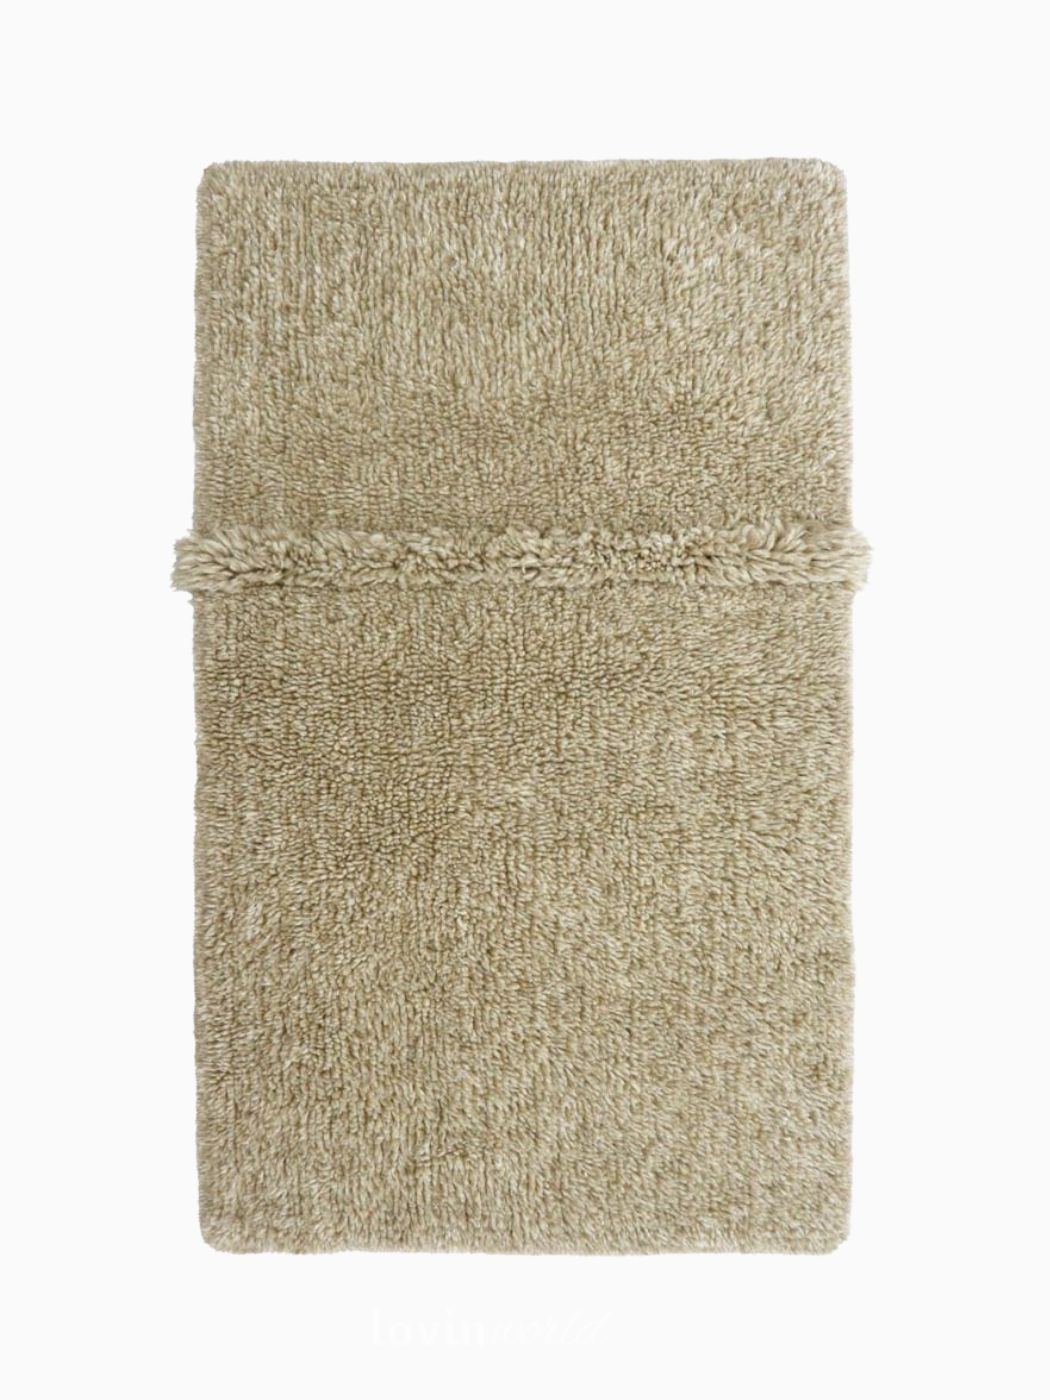 Tappeto di lana Tundra Blended Sheep, in colore beige-1